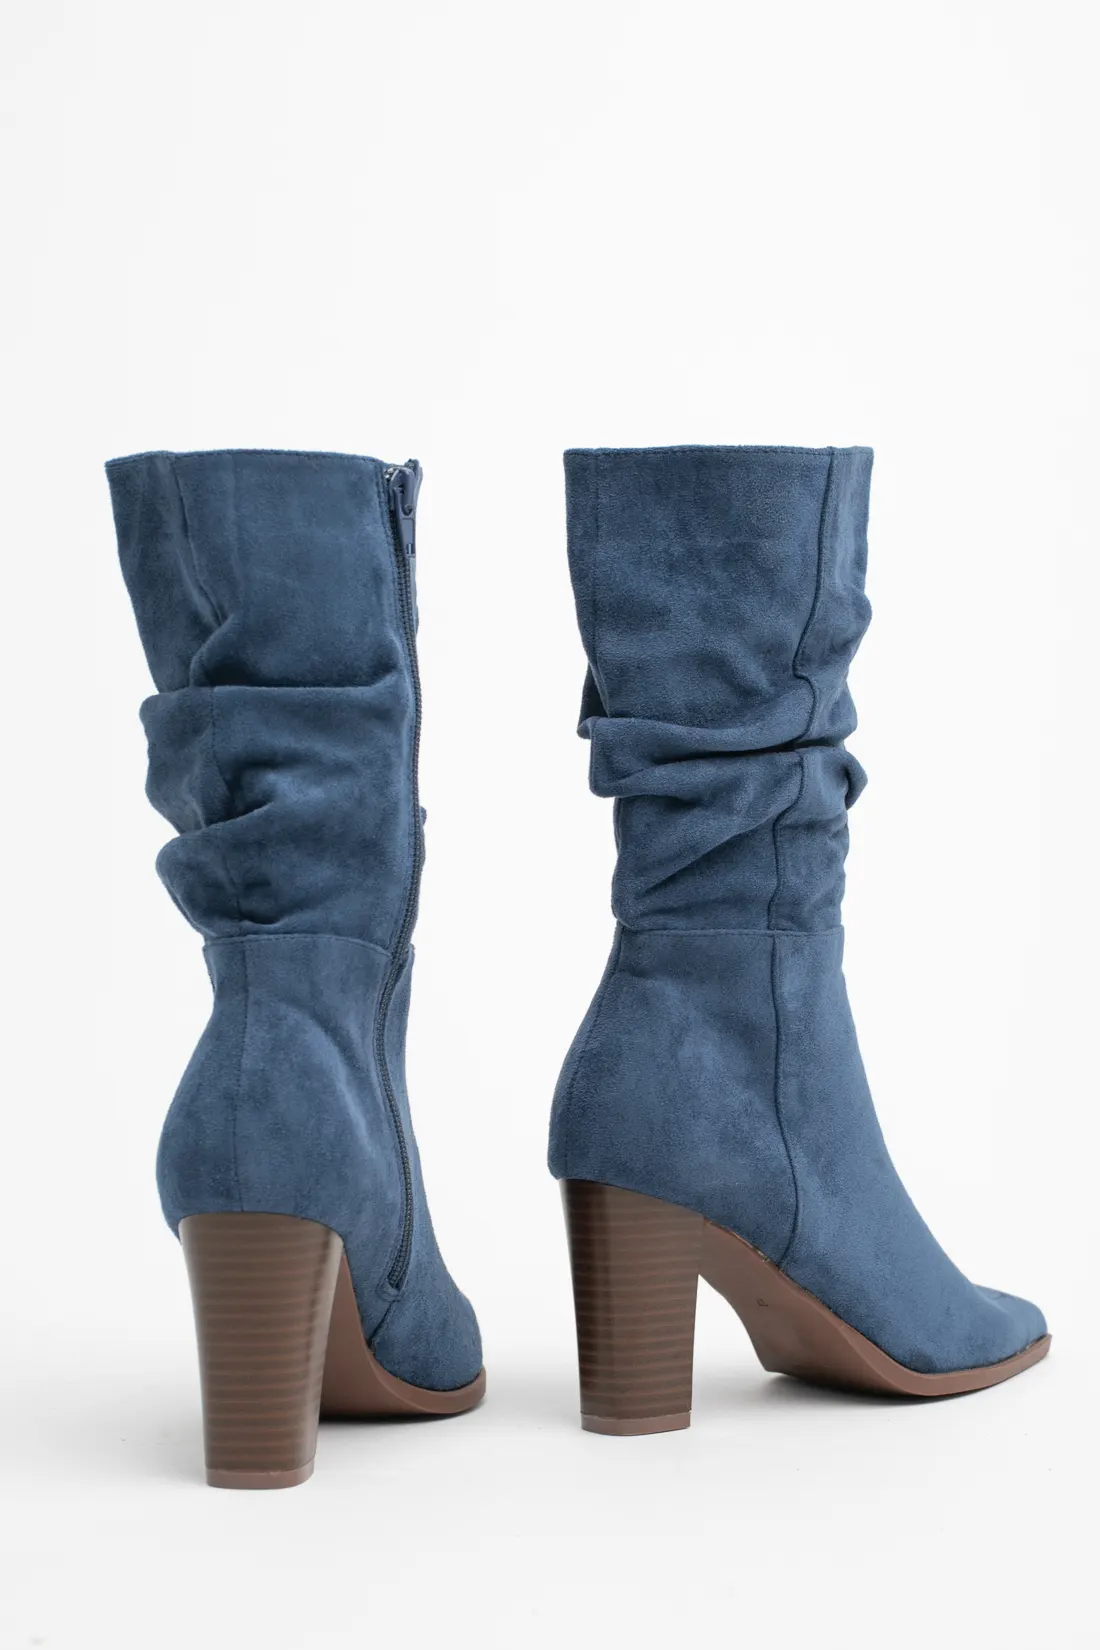 TOMODE BOOT - BLUE